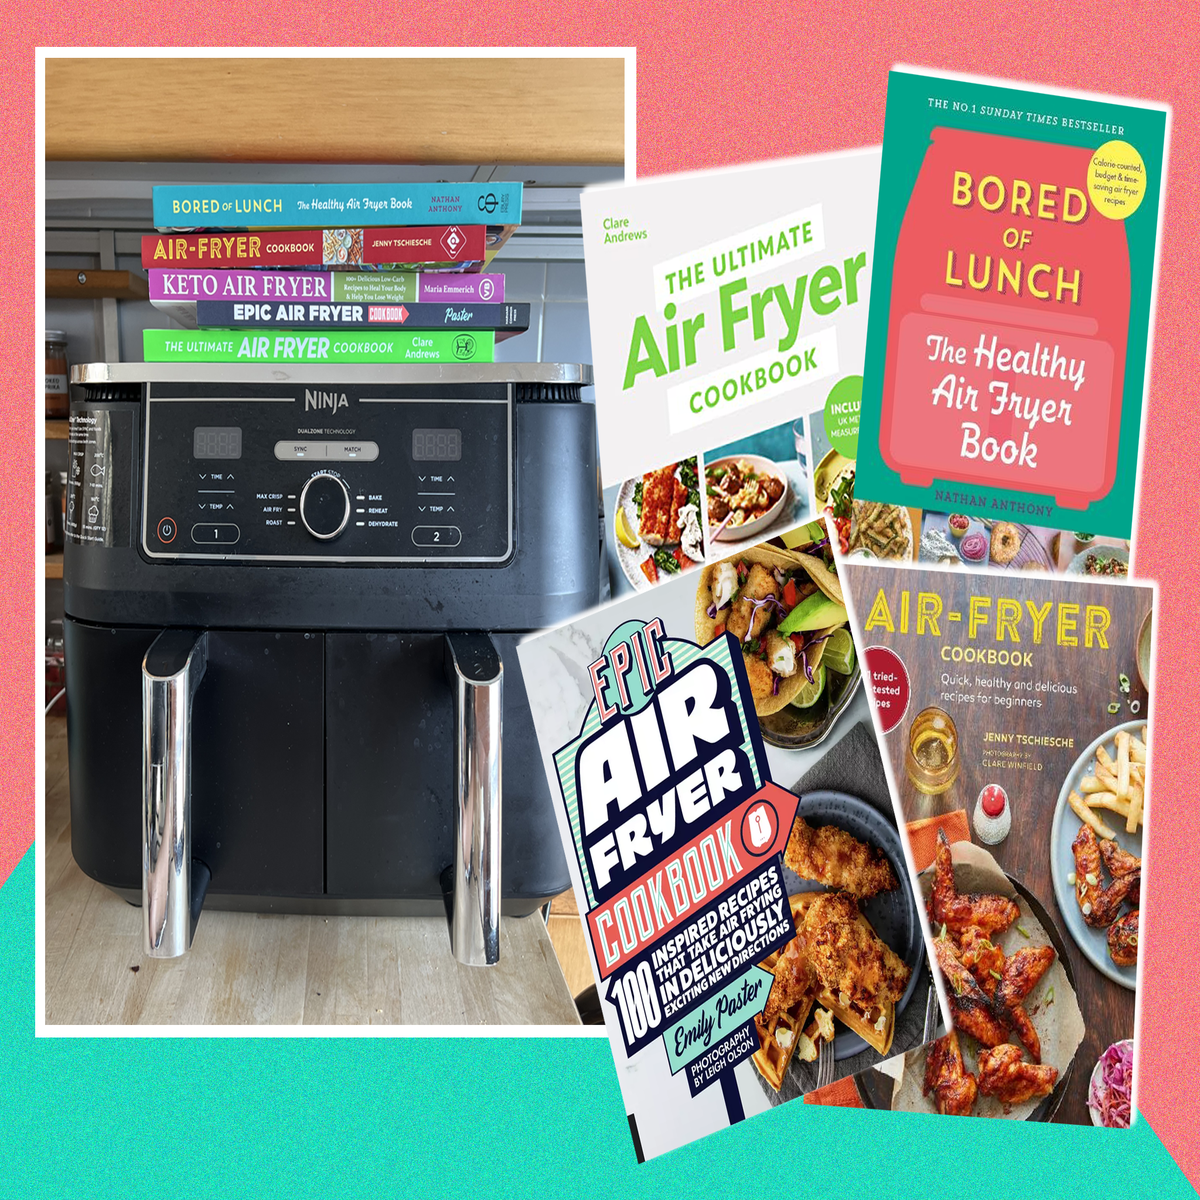 https://static.independent.co.uk/2023/06/27/15/best%20air%20fryer%20cook%20books.png?width=1200&height=1200&fit=crop